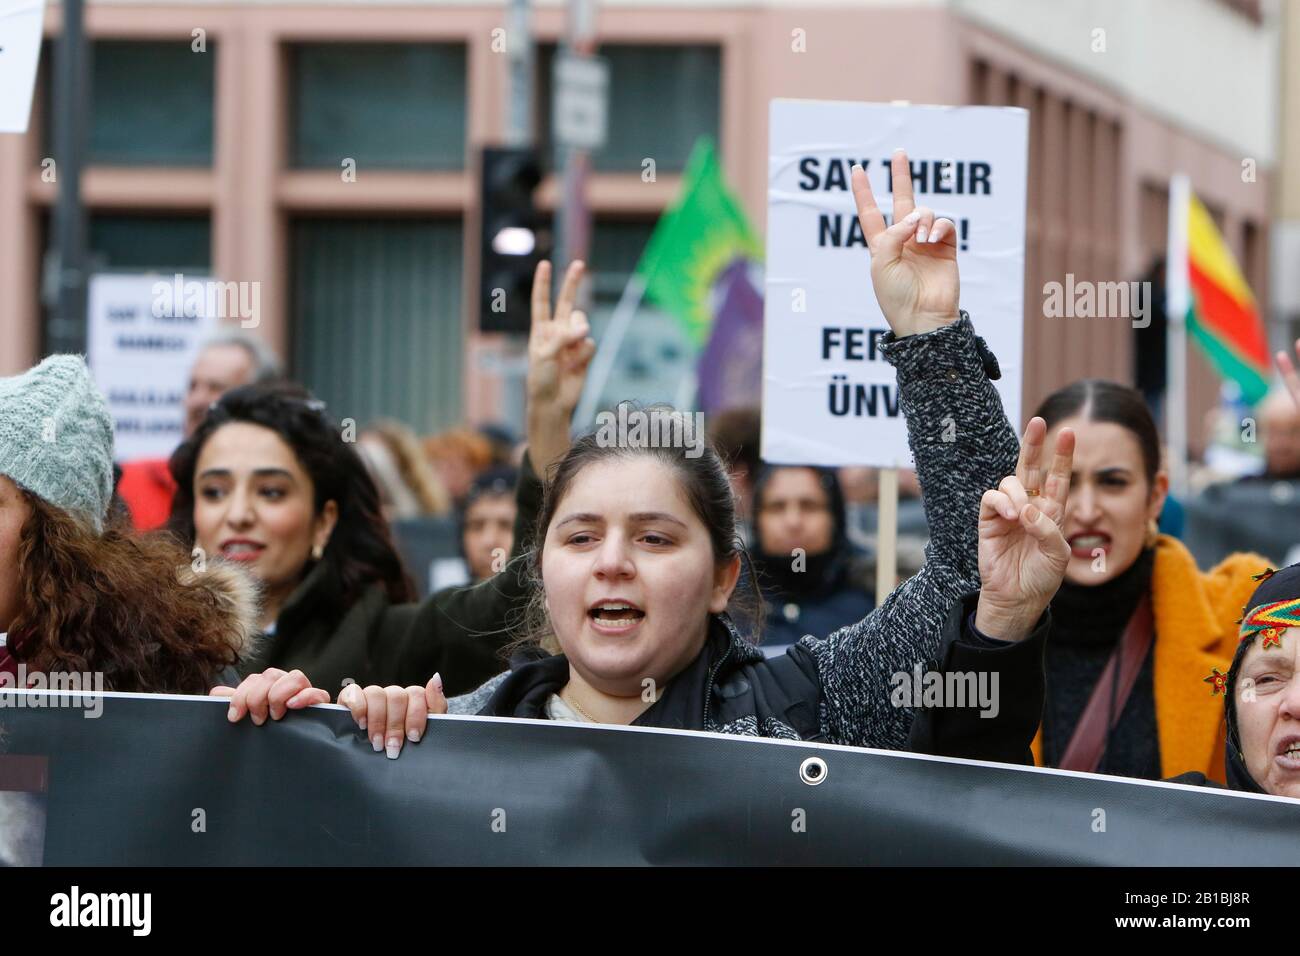 (2/22/2020) A protester is making a victory sign. Several thousand people marched through Hanau three days after the Hanau Shootings, to remember the victims and to protest against the rise in fascism and racism in Germany. (Photo by Michael Debets/Pacific Press/Sipa USA) Stock Photo